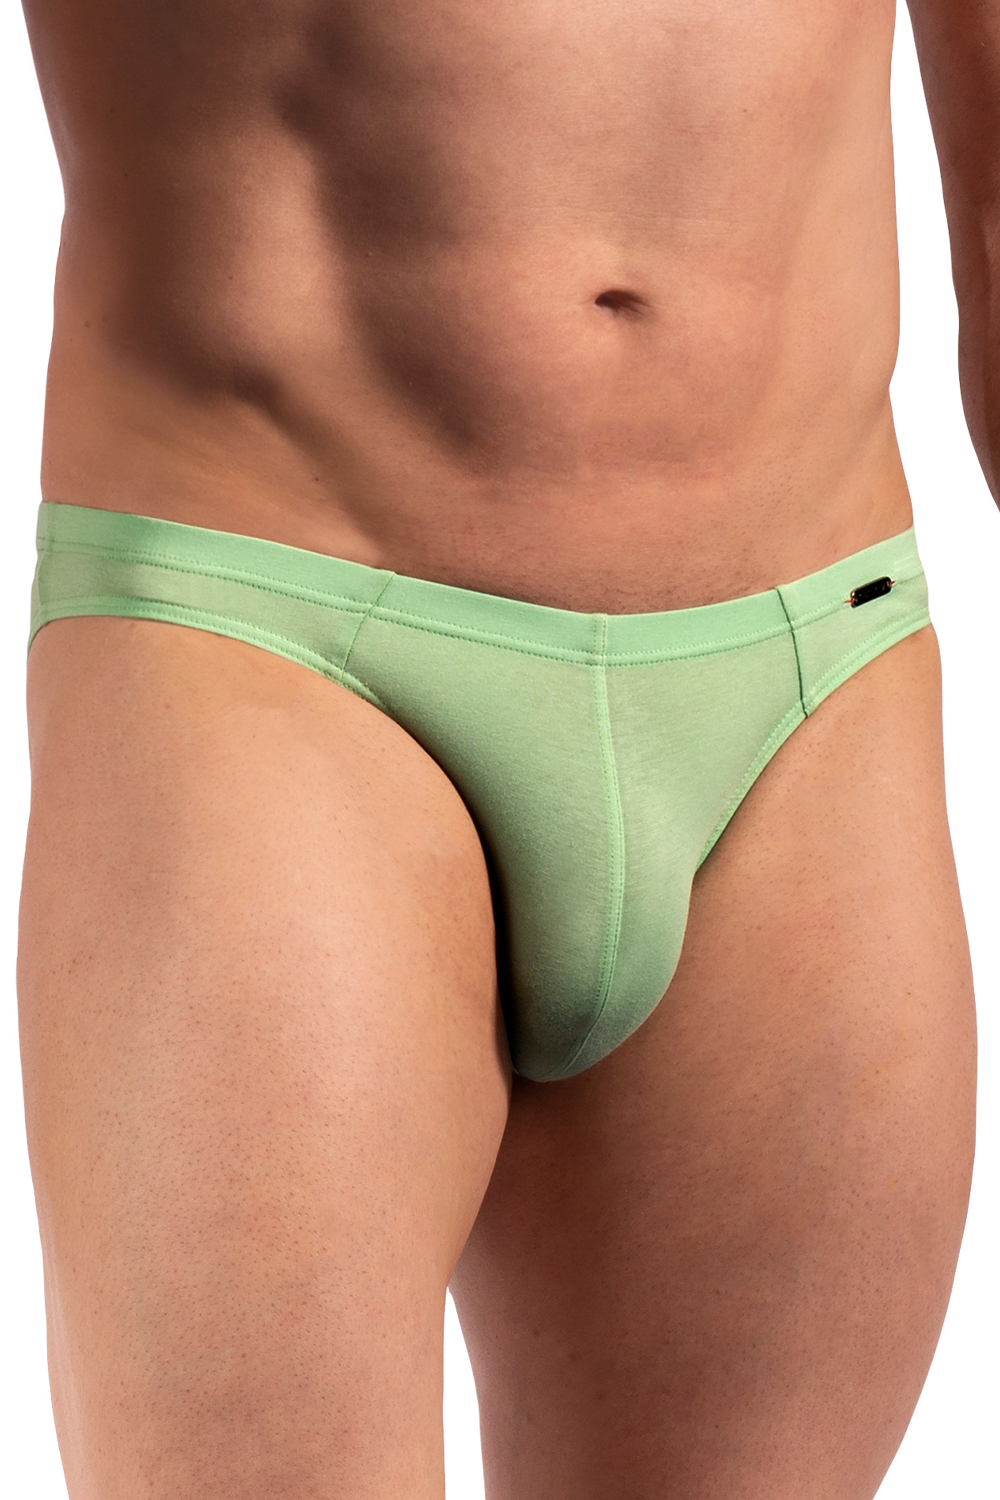 Olaf Benz RED2304 Brazilbrief 109257 Leaves Green